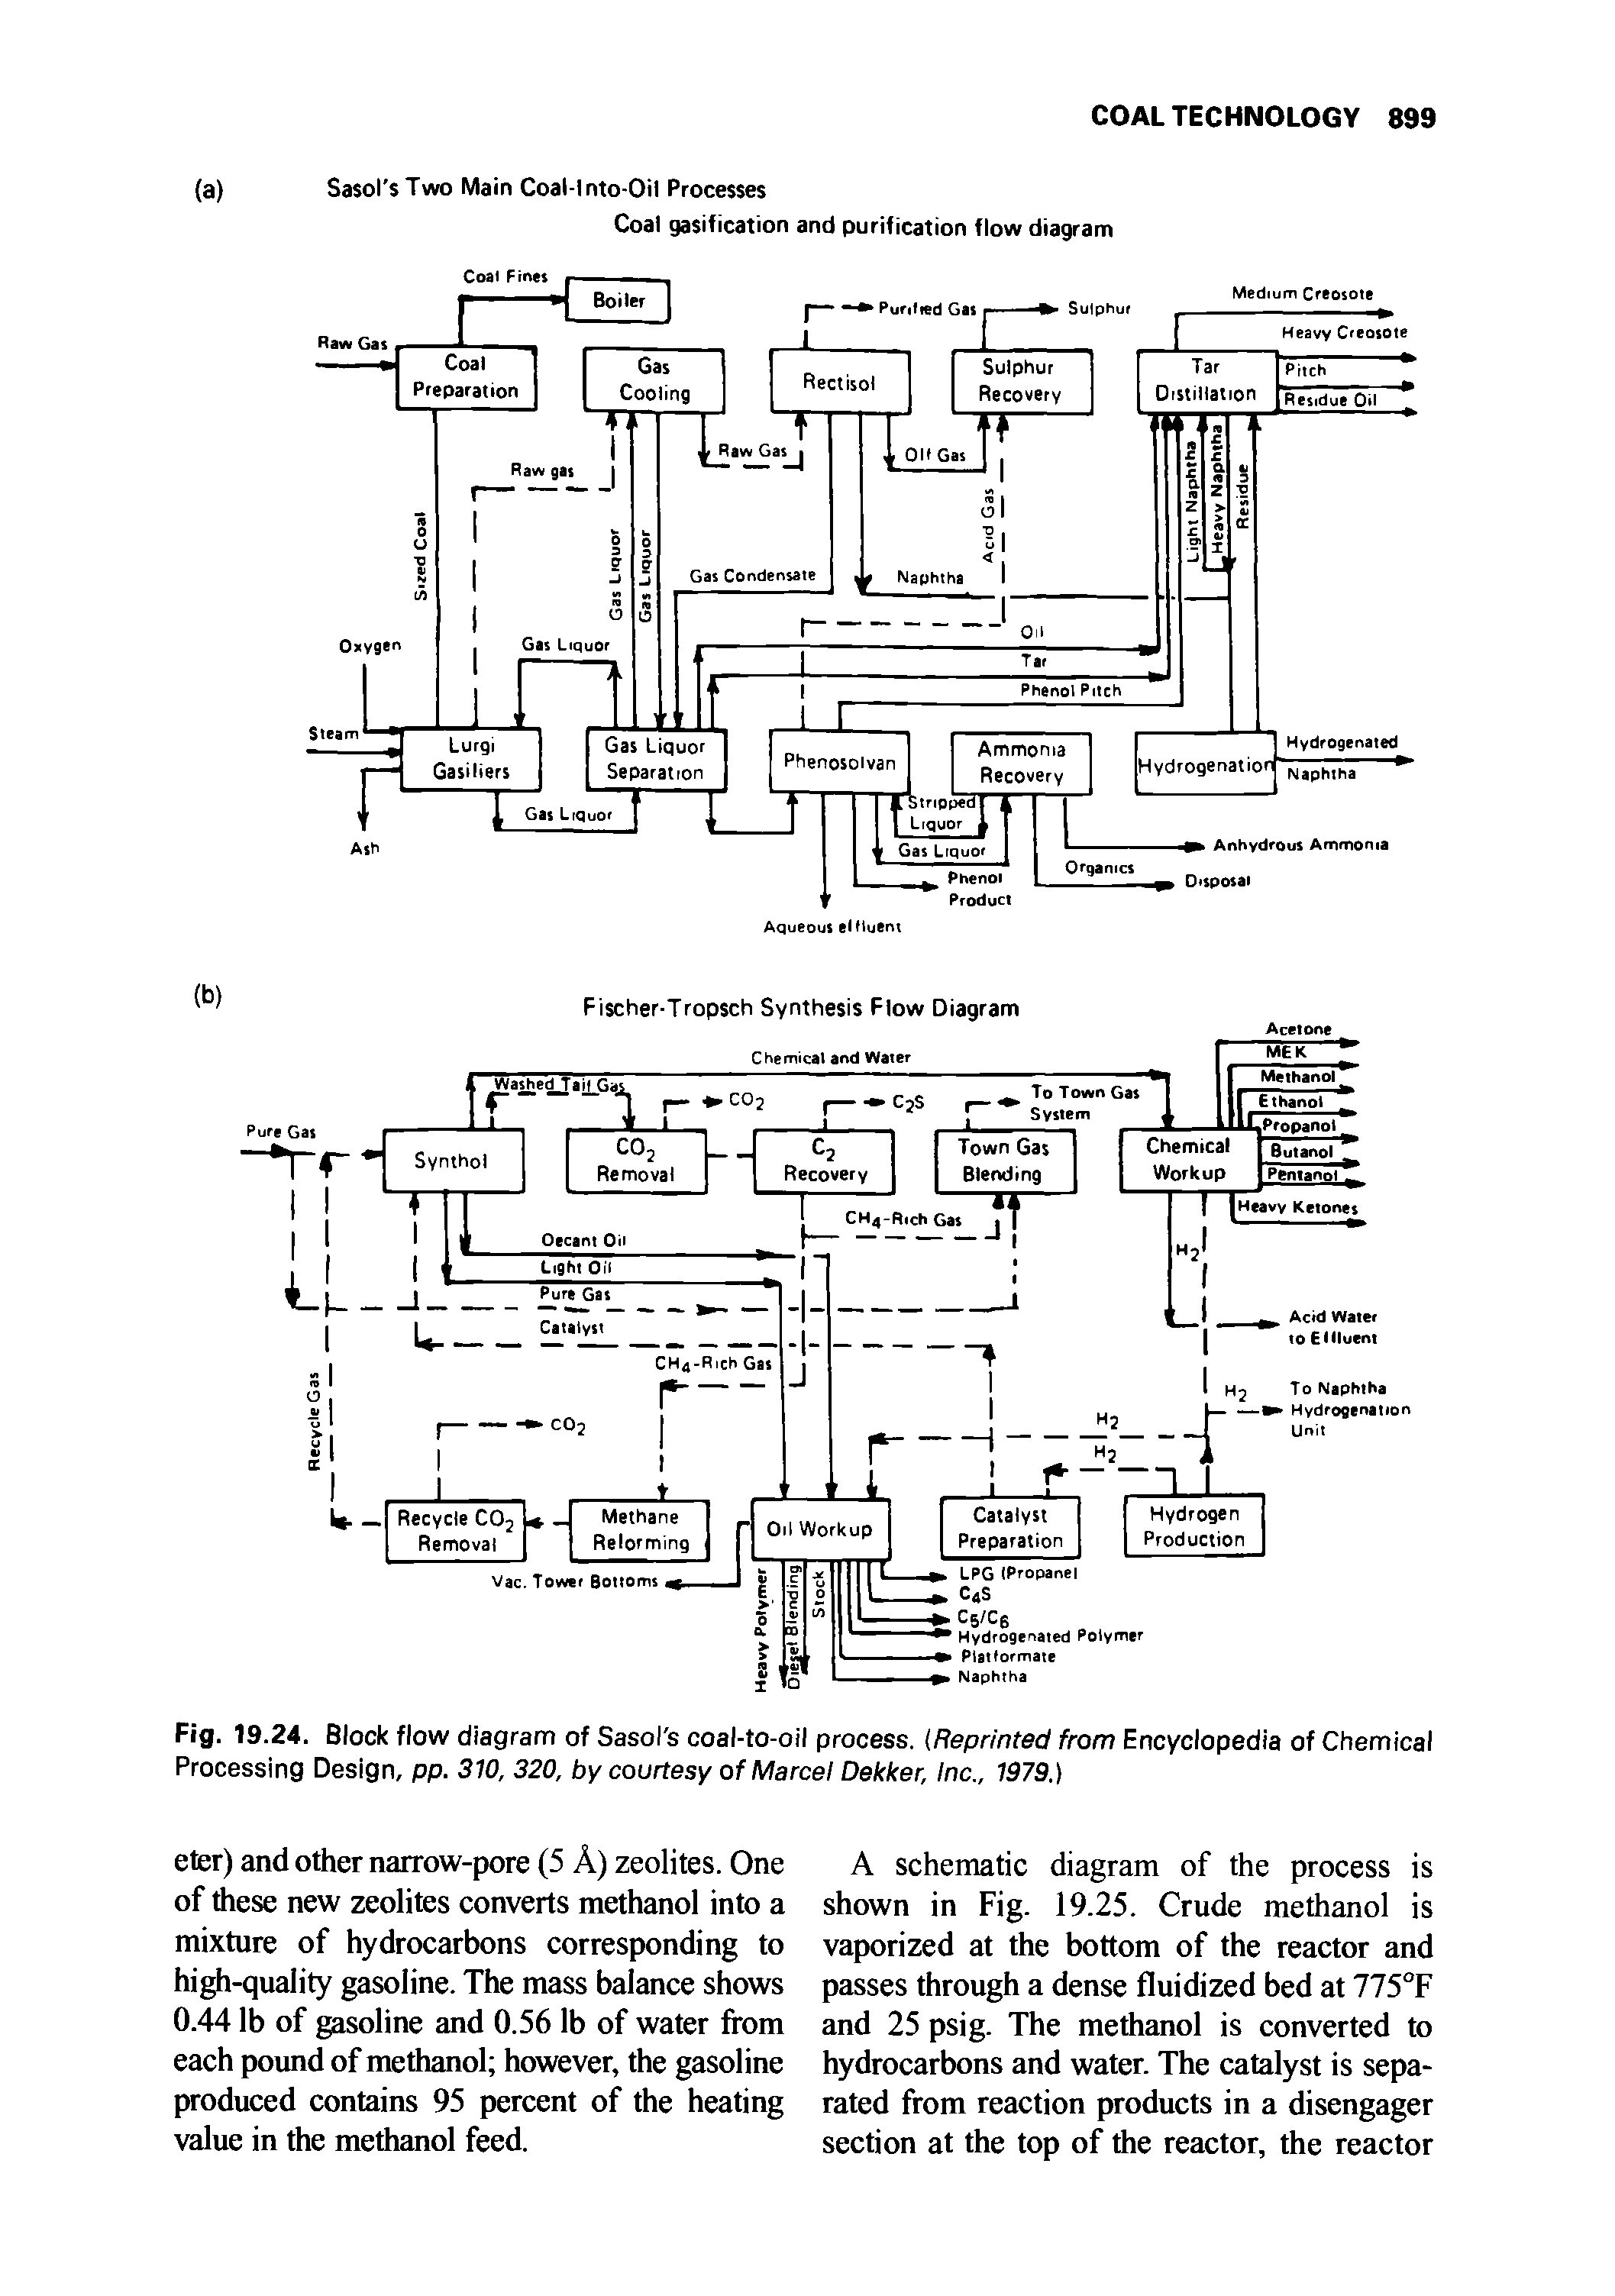 Fig. 19.24. Block flow diagram of Sasol s coal-to-oil process. (Reprinted from Encyclopedia of Chemical Processing Design, pp. 310, 320, by courtesy of Marcel Dekker, Inc., 1979.)...